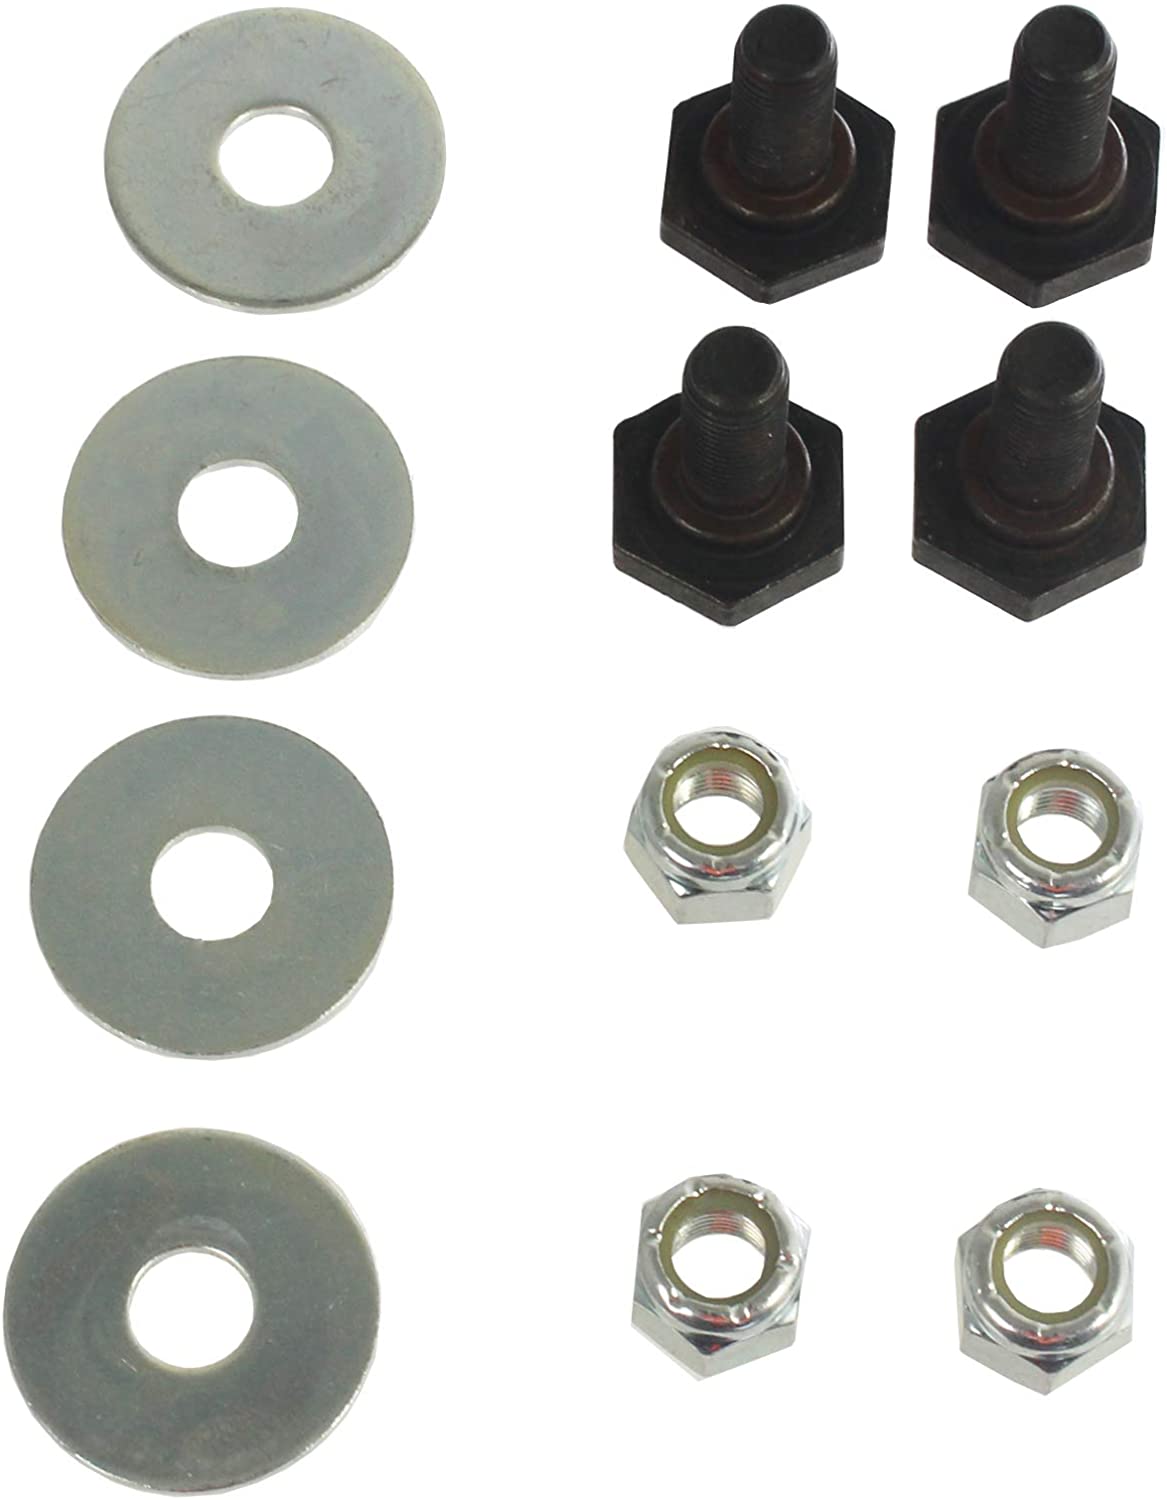 Blade Tips & Bolts Set for HAYTER Lawnmower (8 of each)